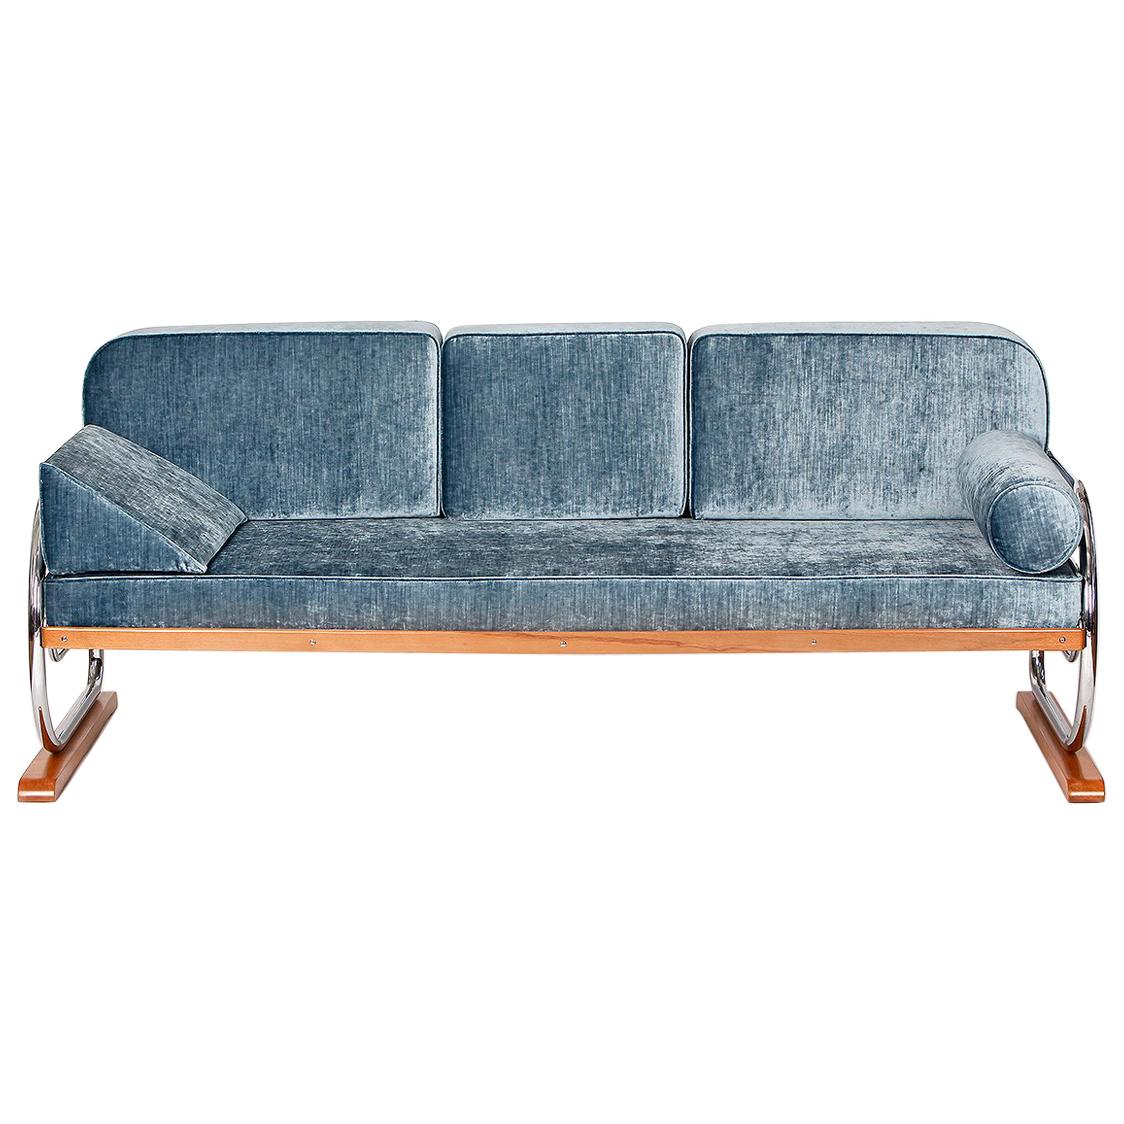 Art Deco Tubular Steel Couch Daybed from H. Gottwald, 1930s